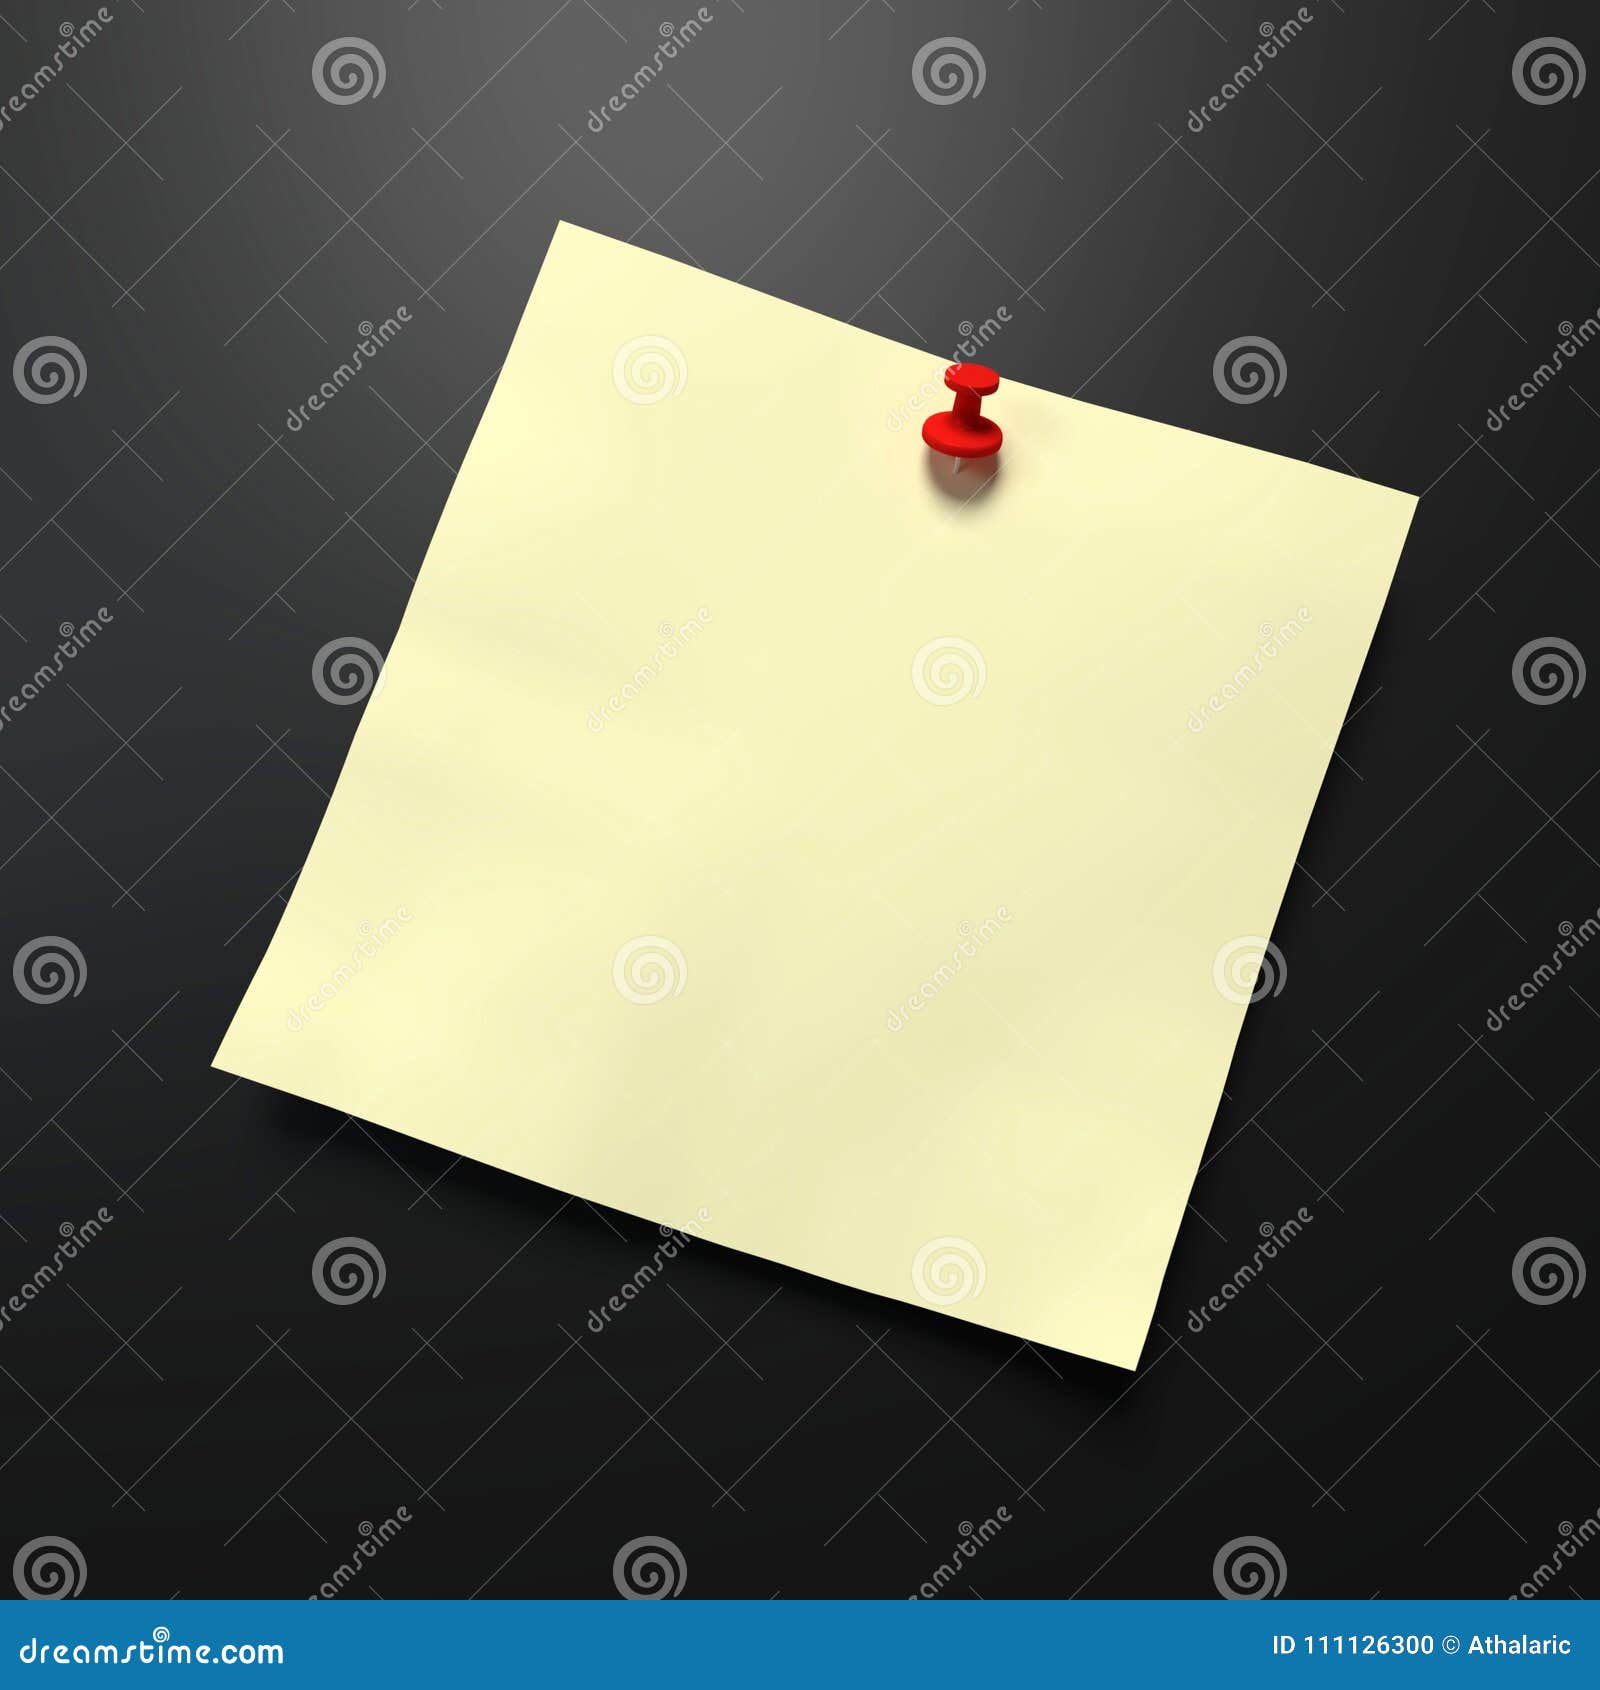 ligh yellow notes paper pin on the desk